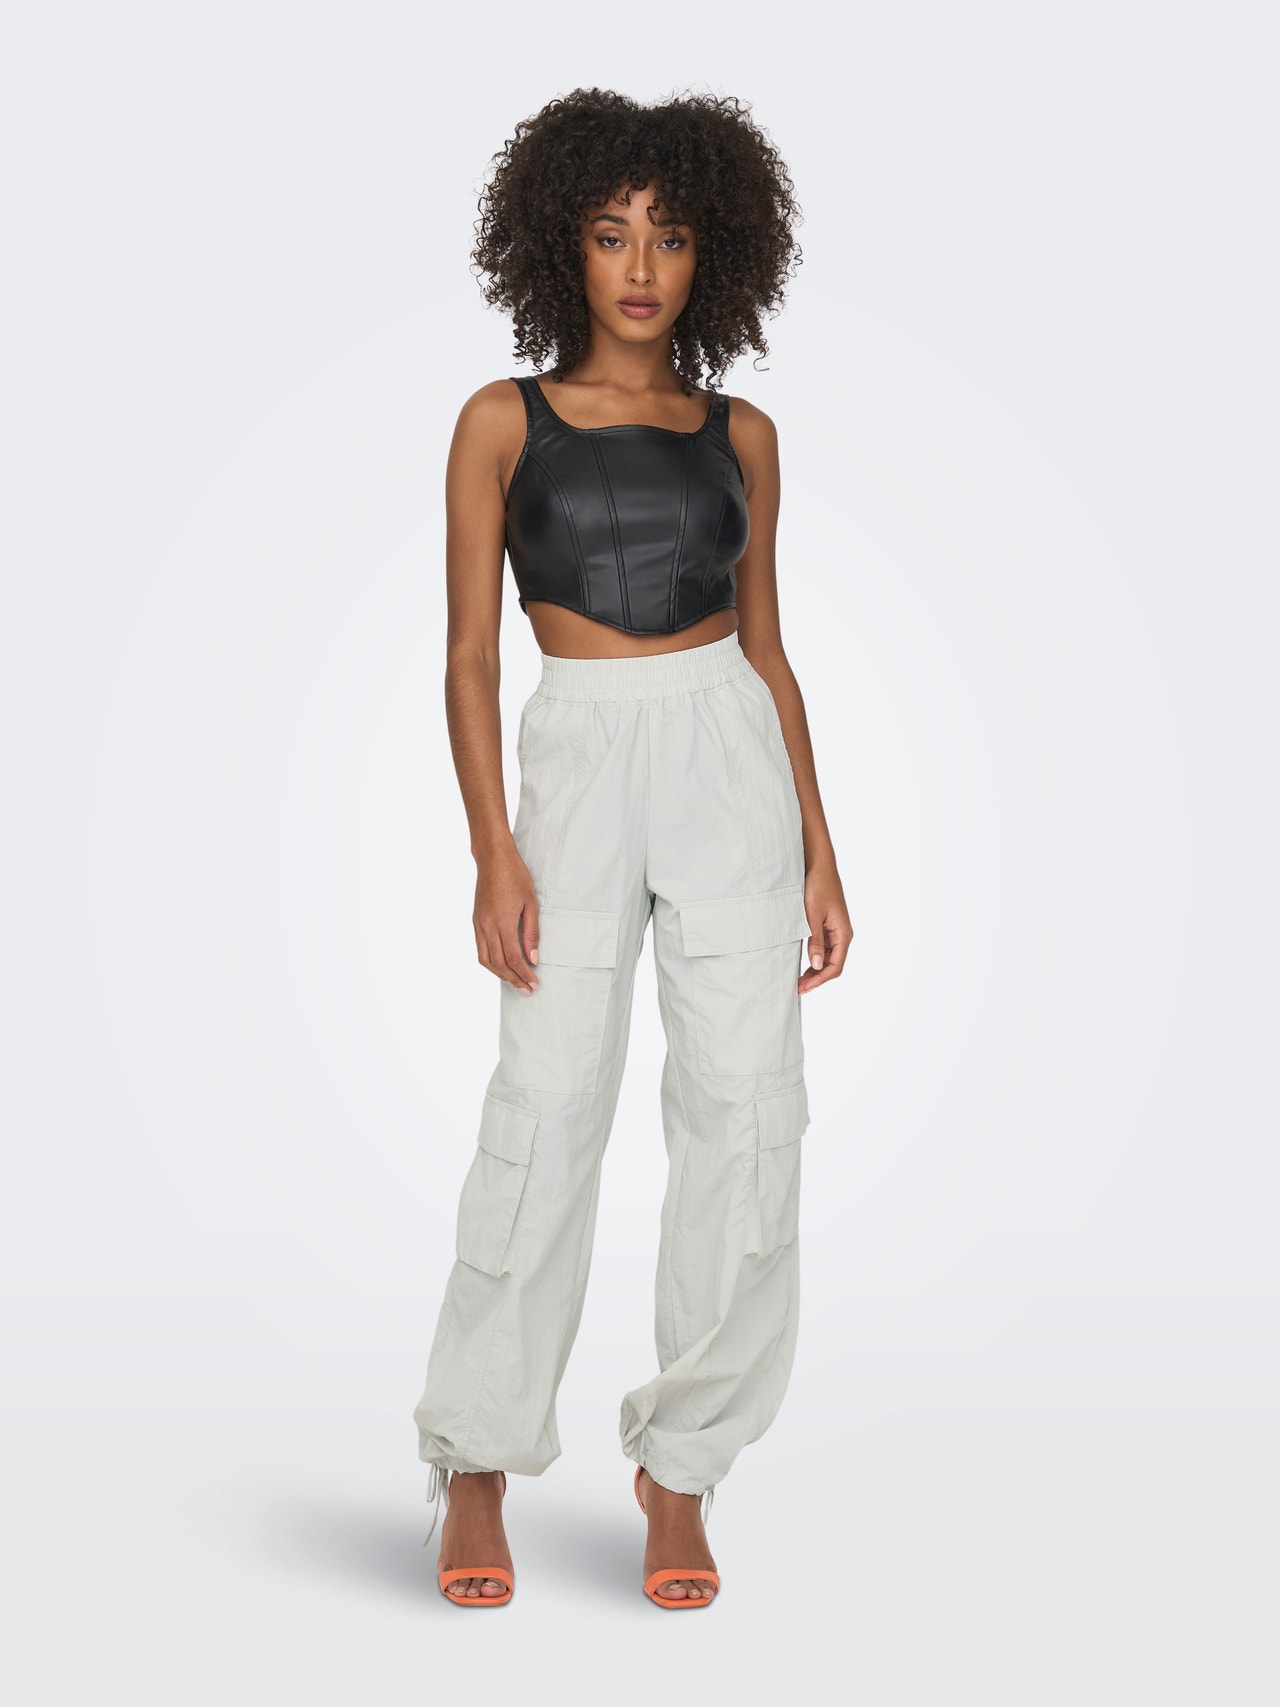 ONLY MW CARGO PARACHUTE PANT -Glacier Gray - 15302732